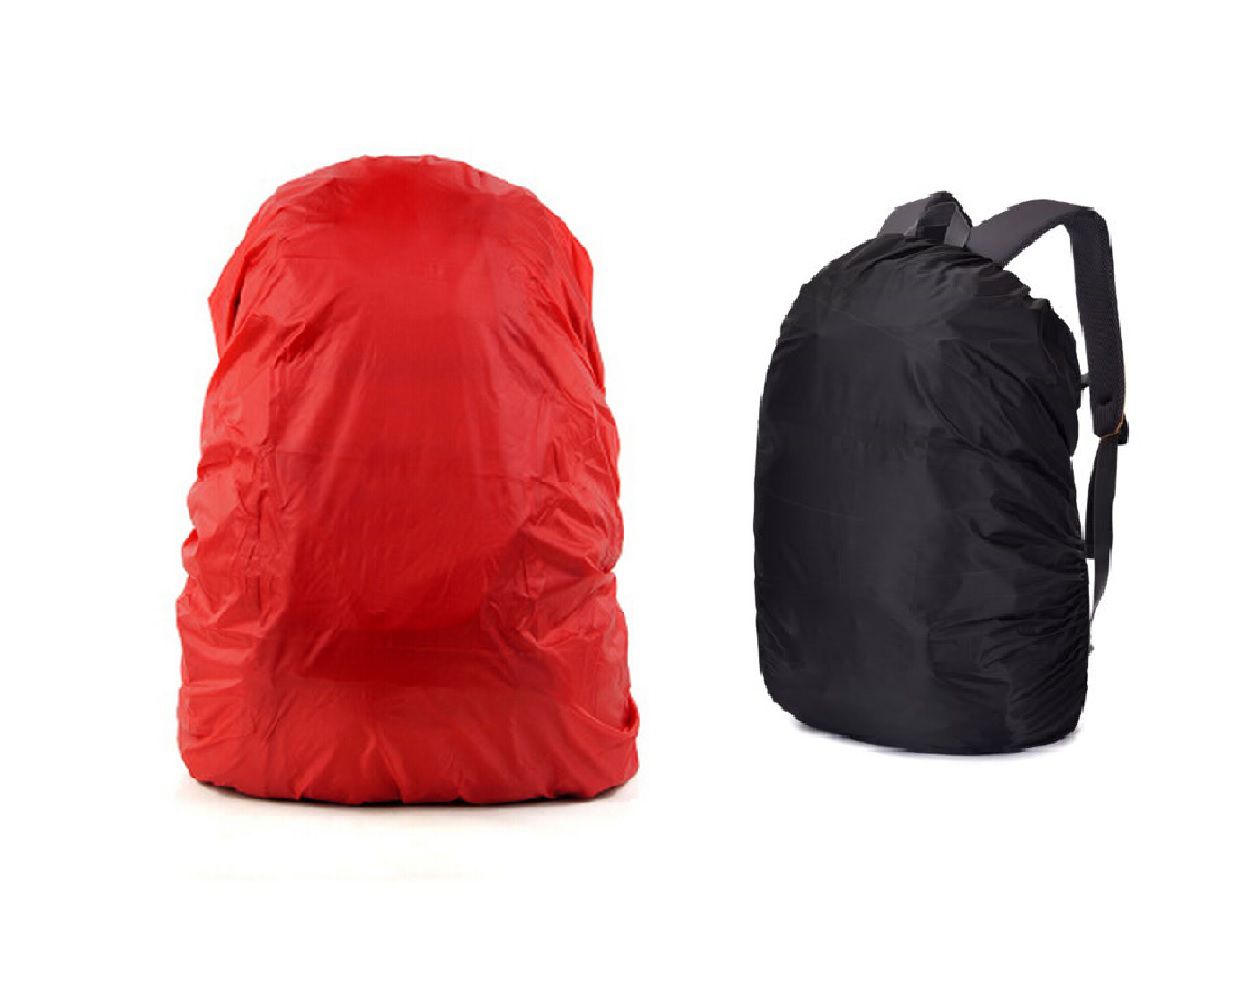 UNBRANDED COLLECTION Black BACKPACK RAIN COVER (MID / STD SIZE) - Buy ...